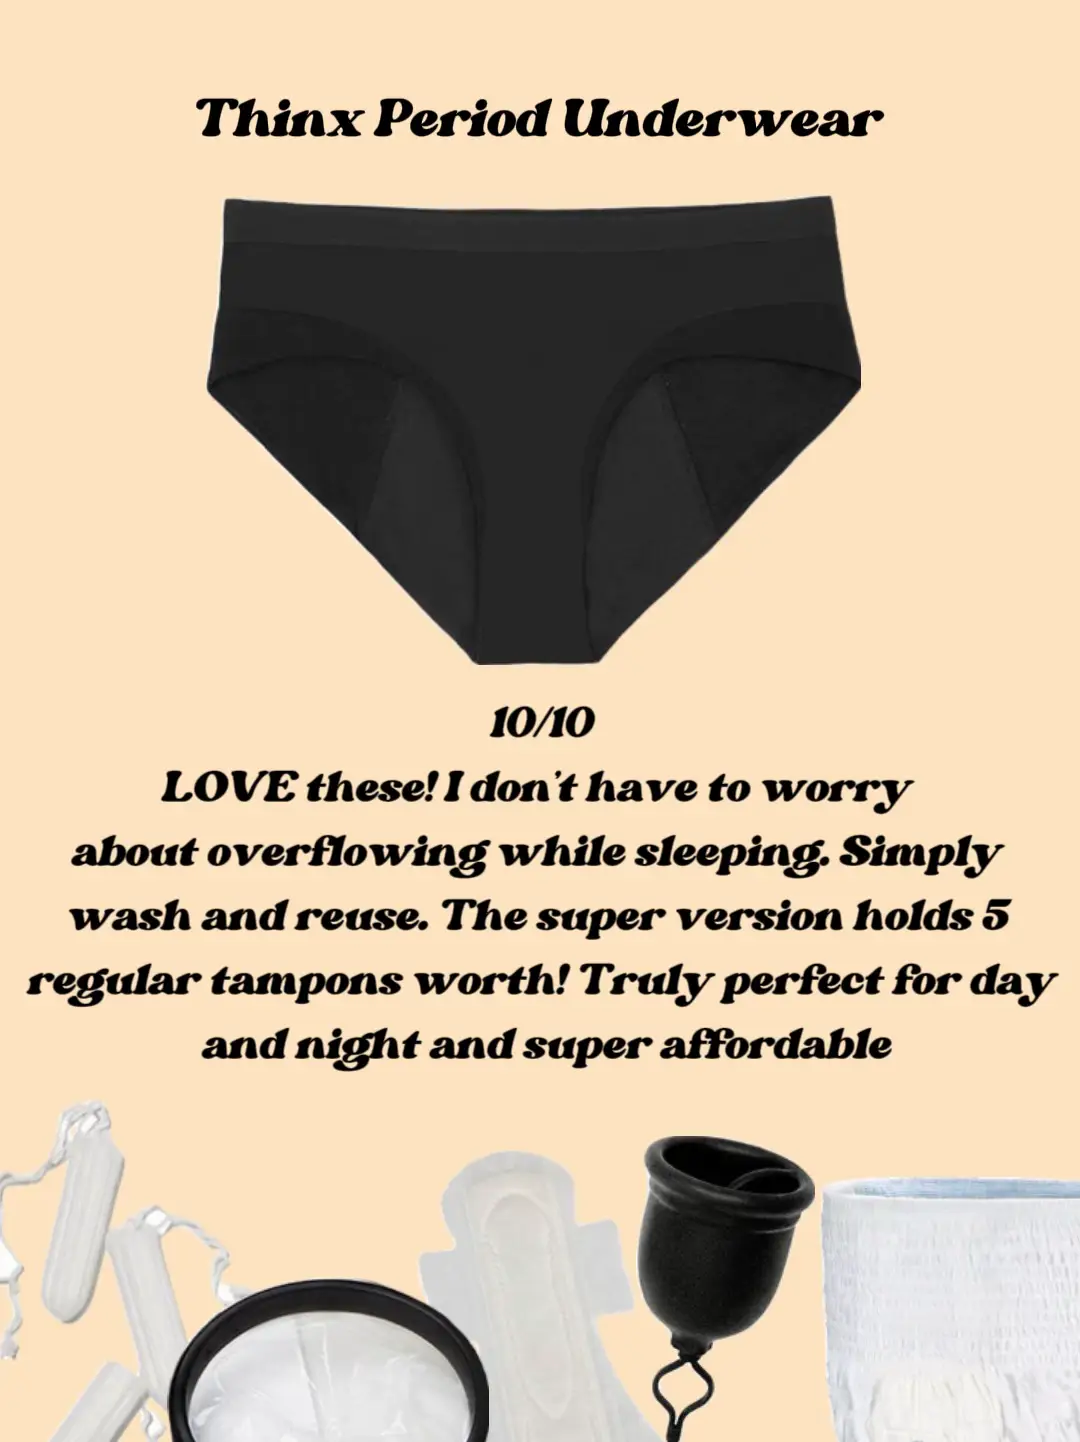 Saalt  Period Care Simplified on X: Saalt period underwear keeps you dry  by instantly pulling moisture down and away from your body. Have a period,  don't feel it.   /